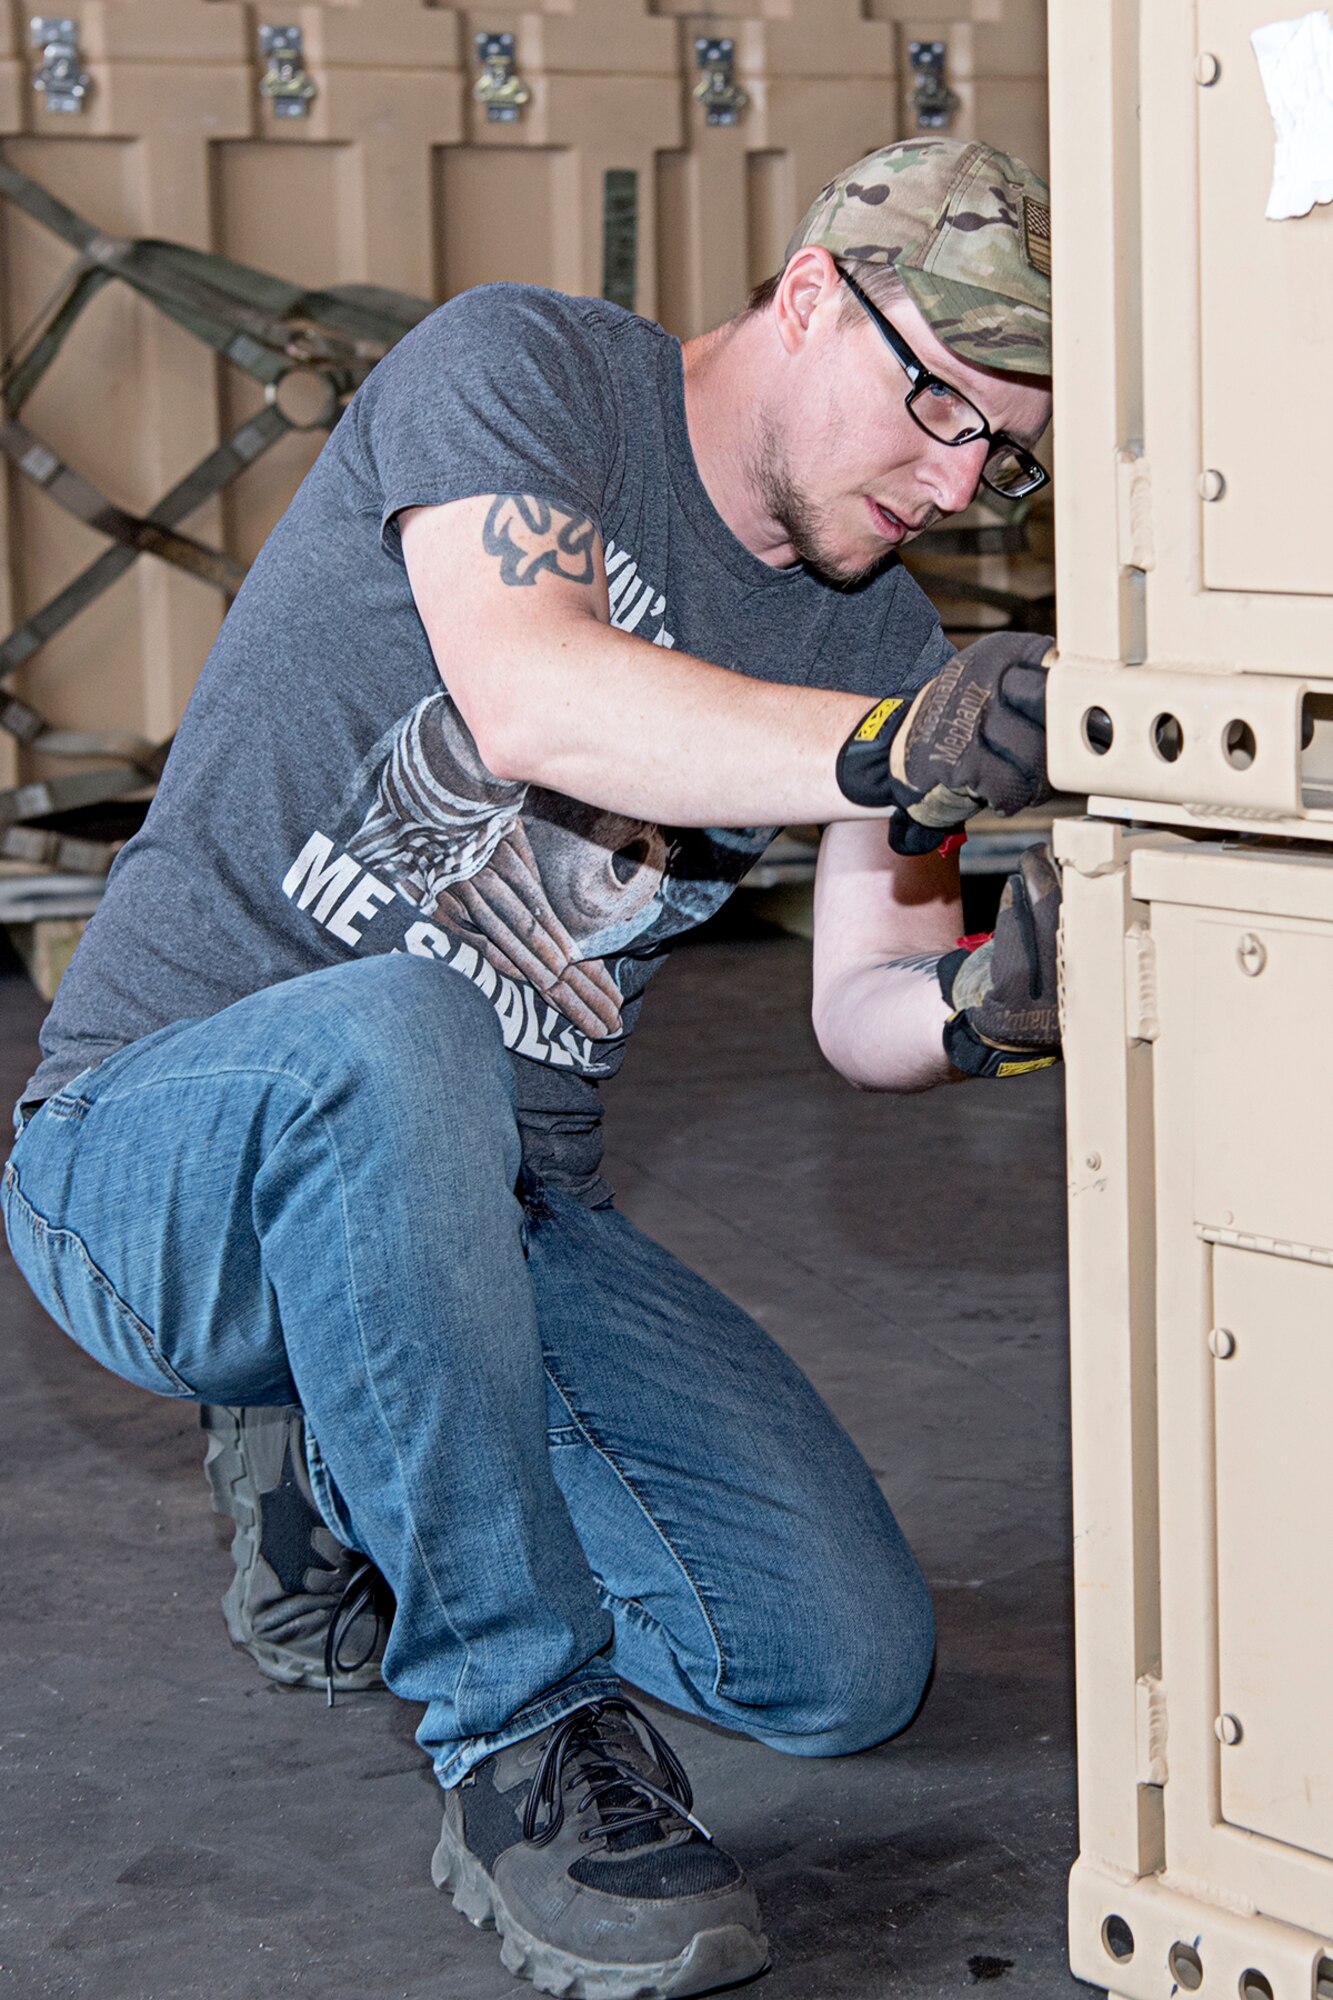 Ryan Sautter, warehouse lead for the Air Force Reserve Command's contingency equipment management facility at Grissom, prepares a generator for palletization and shipment to Hawaii for an joint service exercise called Pacific Warriorz. Grissom's CEMF supports dozens of units supplying civil engineers with the equipment they need to perform missions around the world.  (U.S. Air Force photo/Douglas Hays)